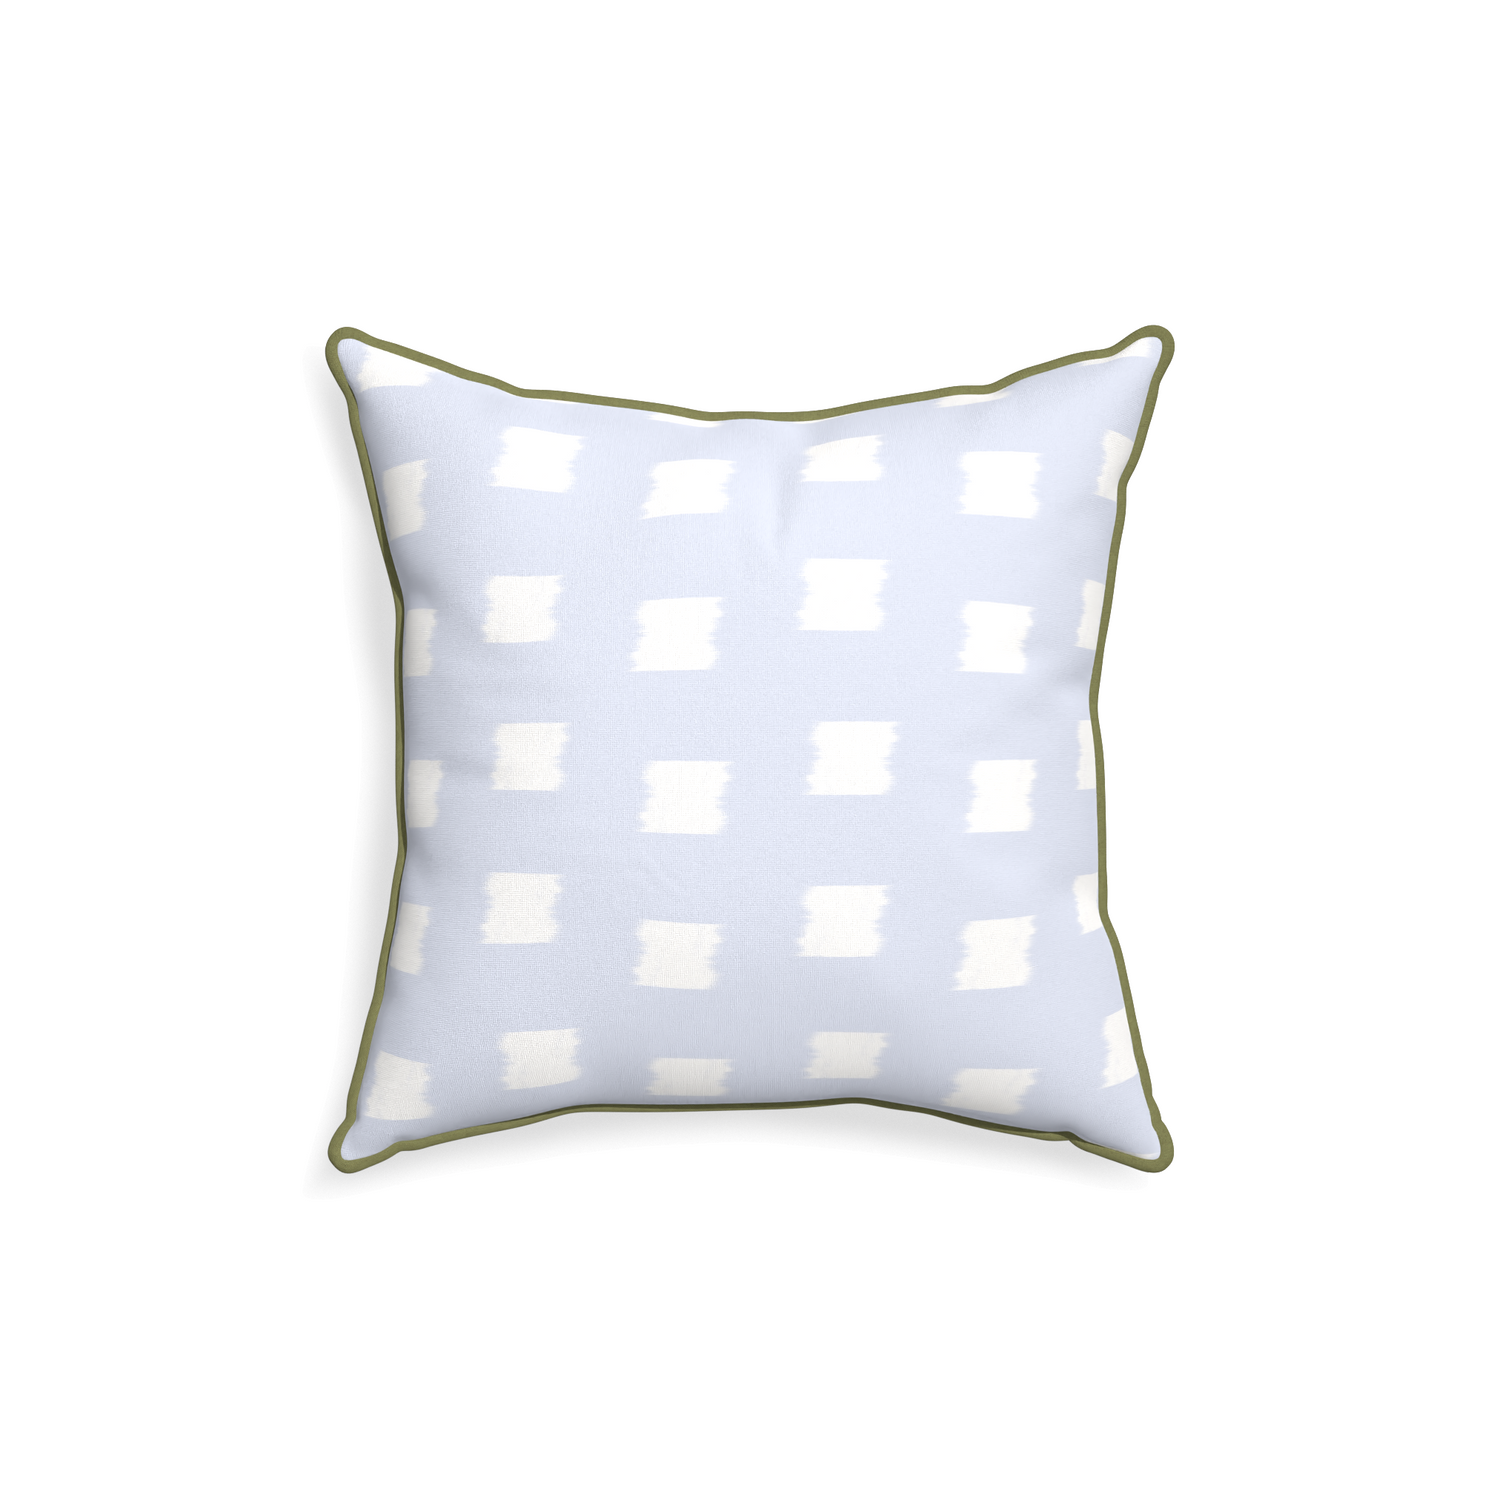 18-square denton custom sky blue patternpillow with moss piping on white background